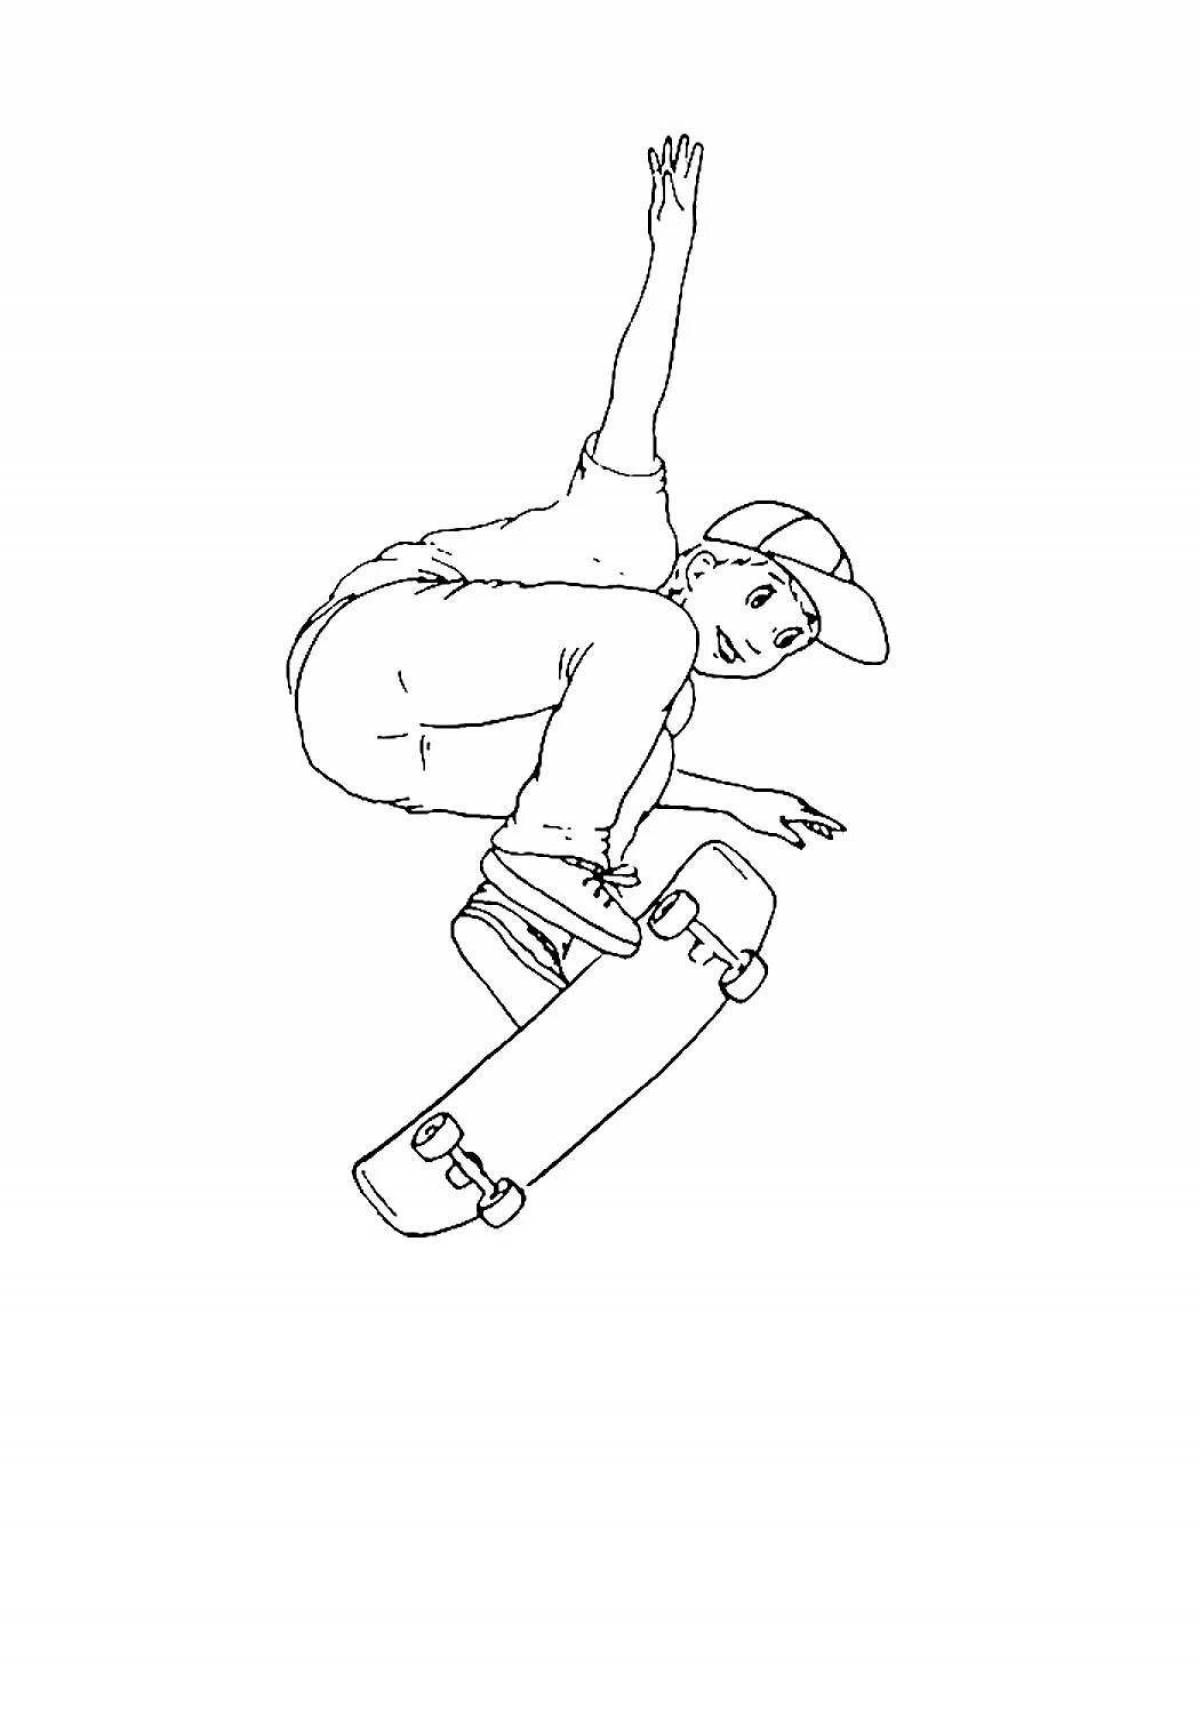 Coloring page determined skateboarder